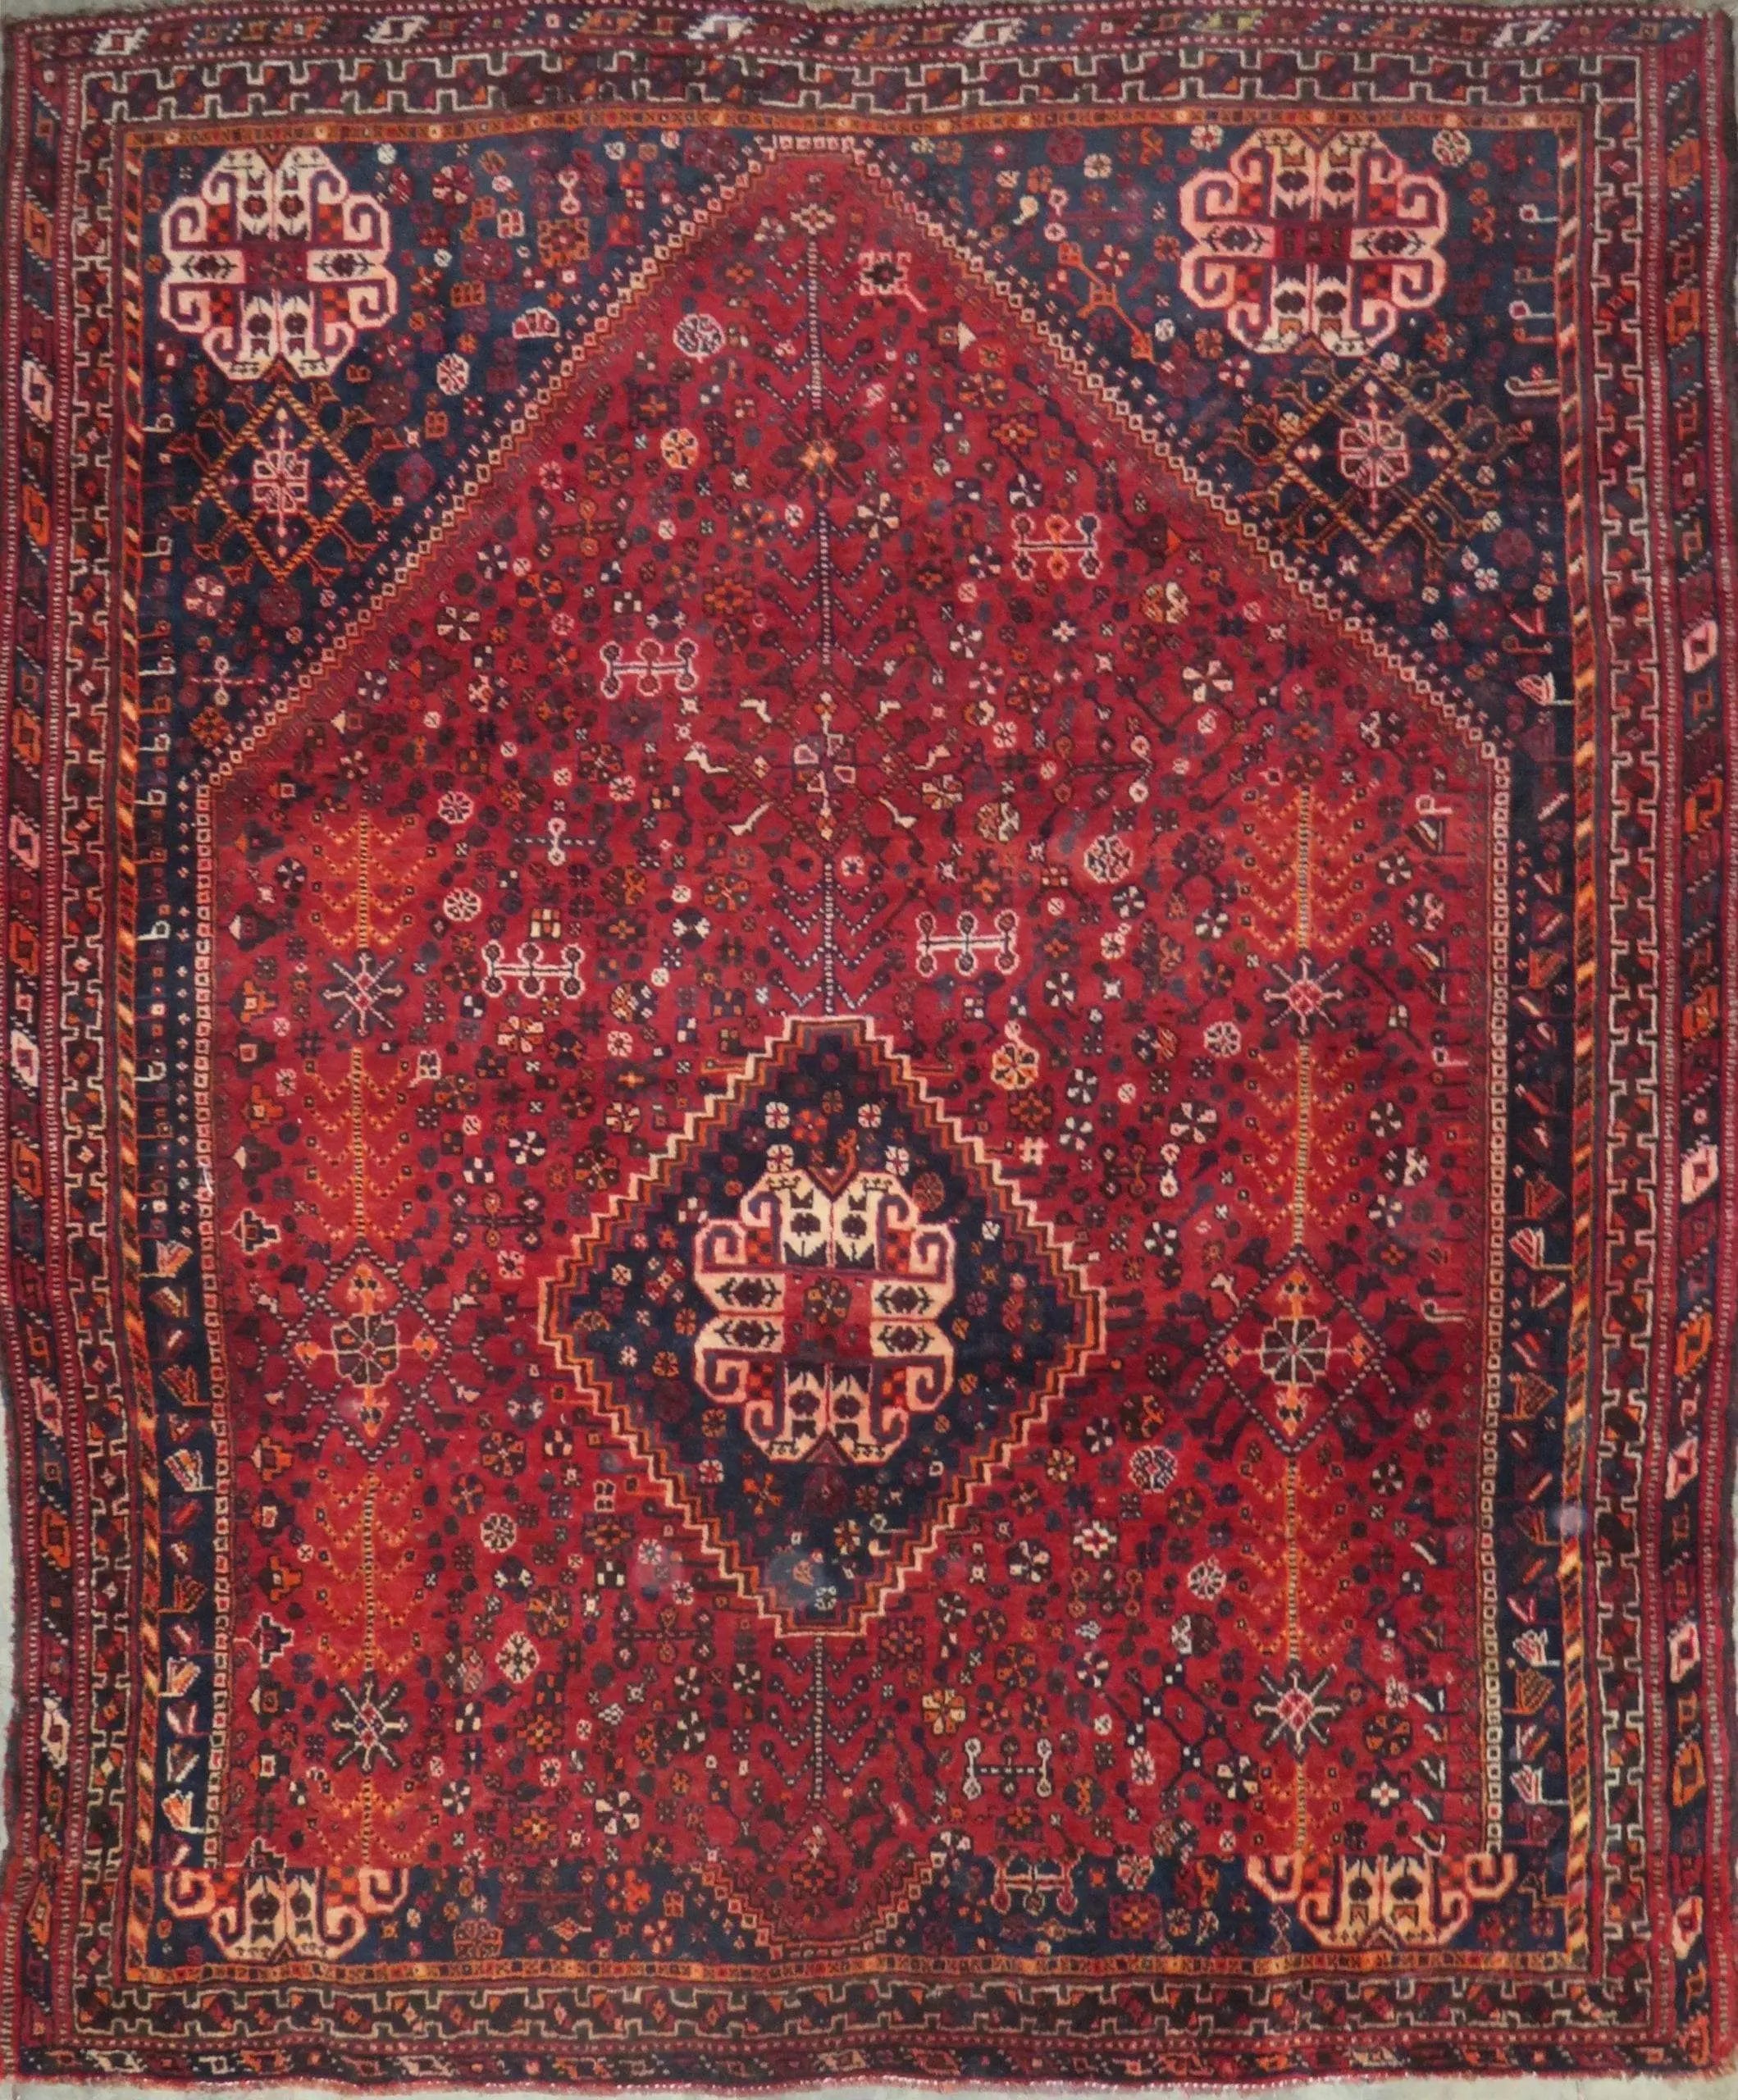 Hand-Knotted Persian Wool Rug _ Luxurious Vintage Design, 6'6" x 5'6", Artisan Crafted